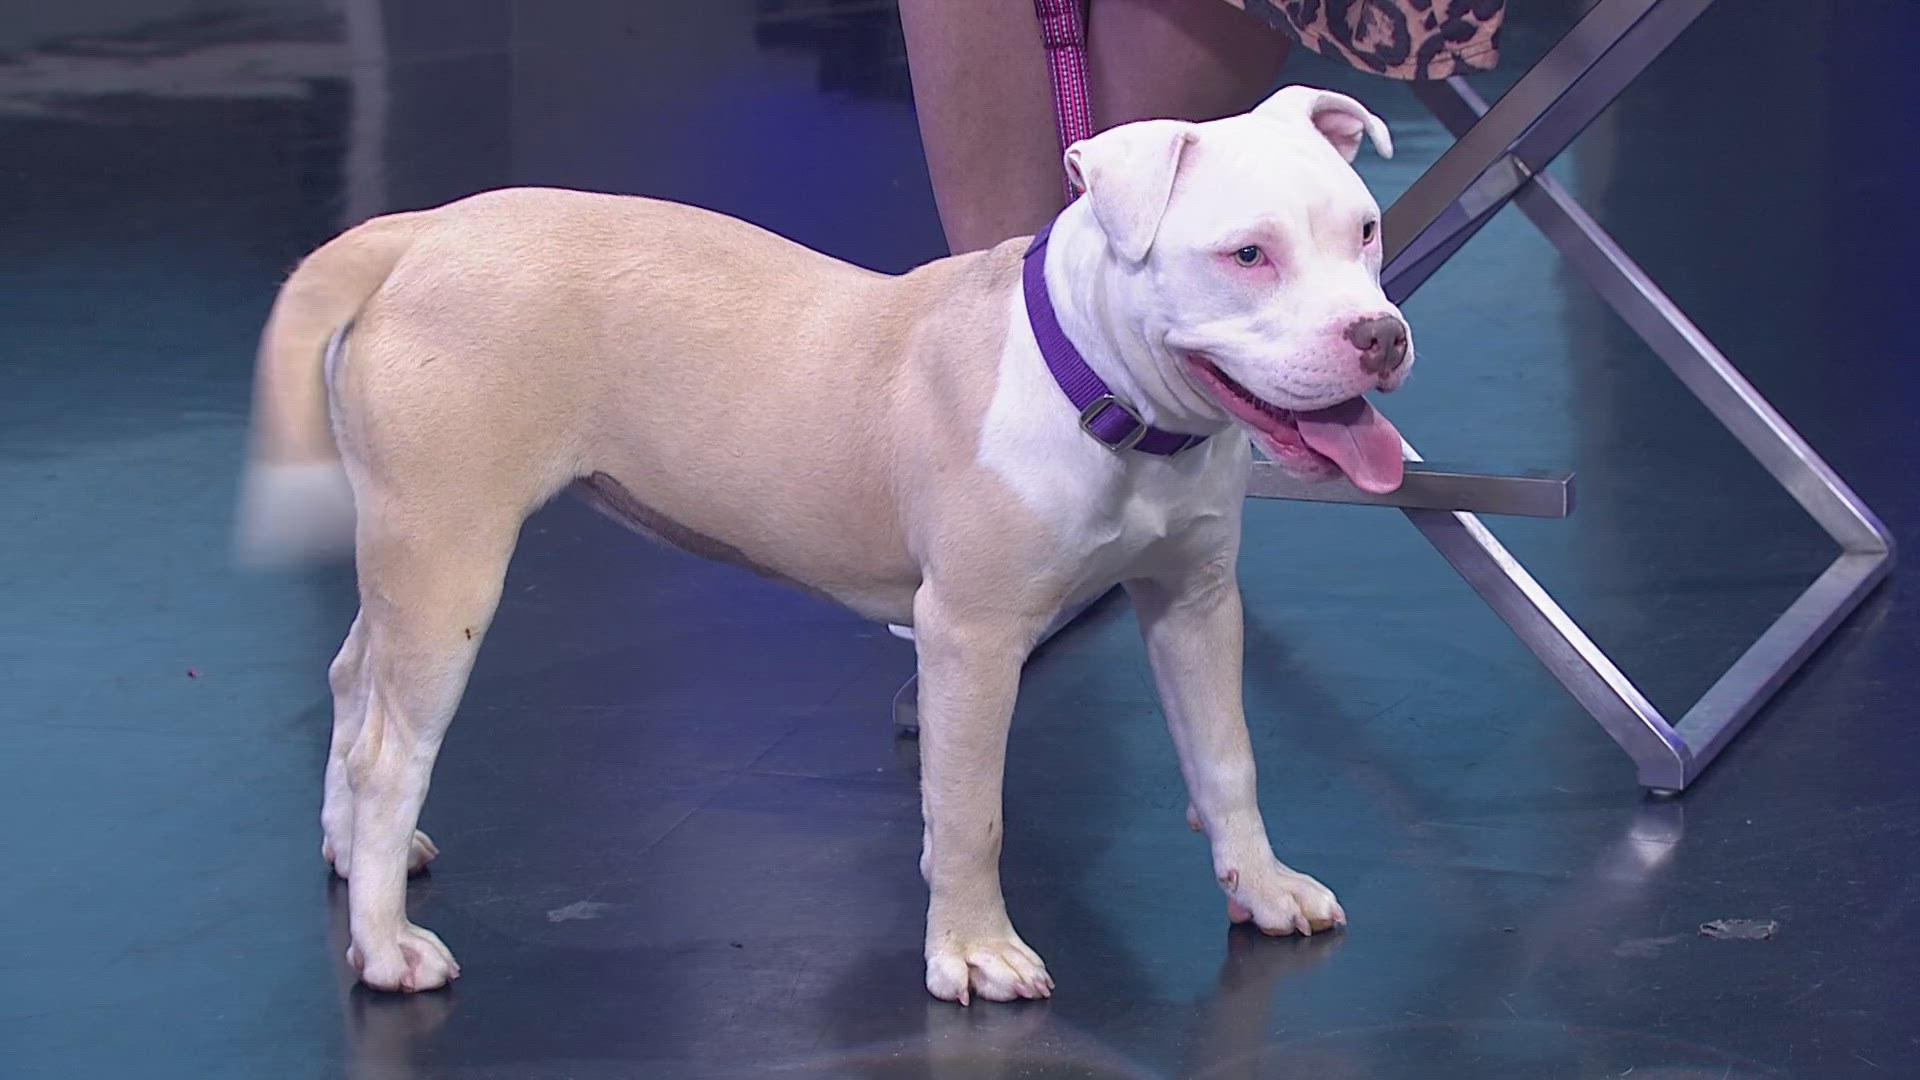 The SPCA of North Texas brought Wynn by our studio for WFAA Midday.